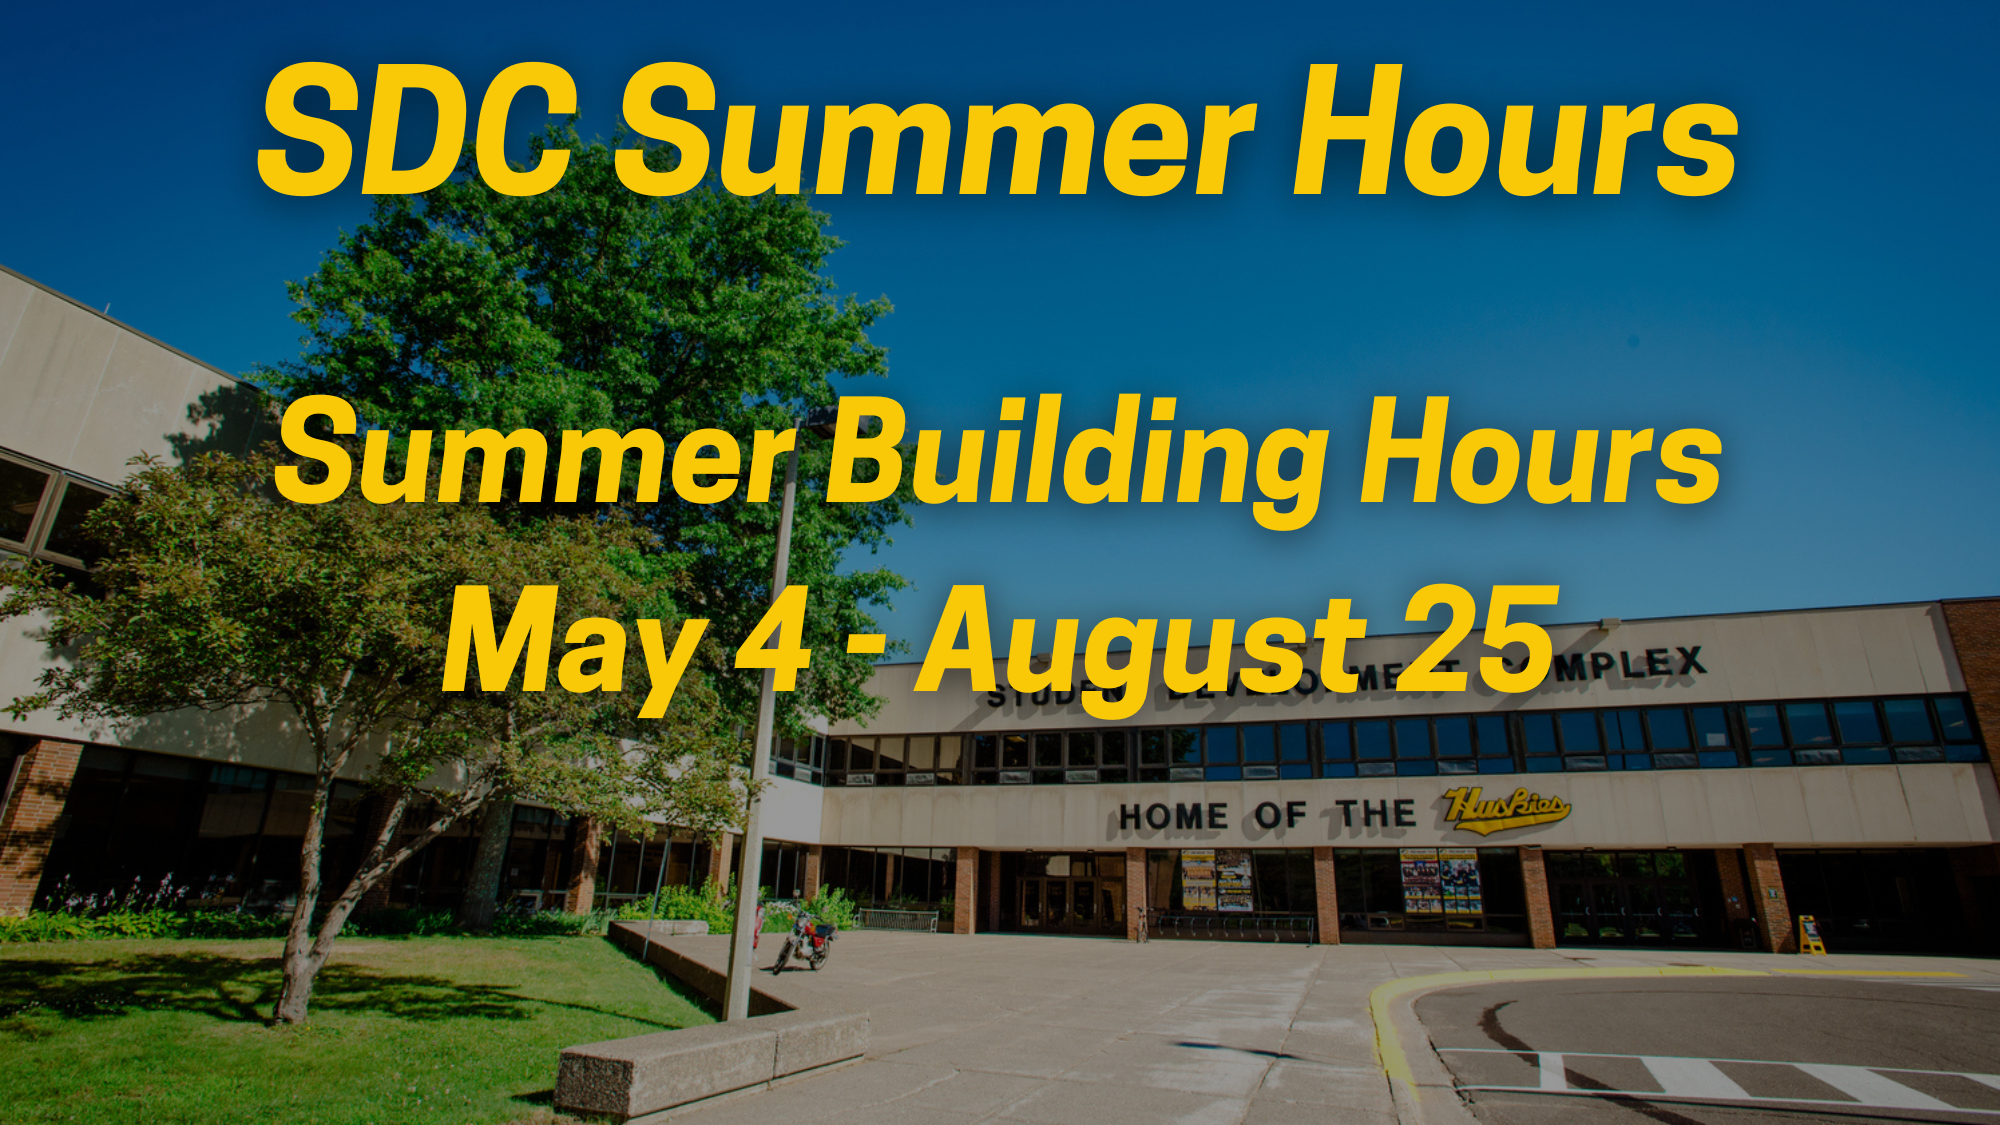 SDC Summer Hours
Summer Building Hours
May 4 - August 25